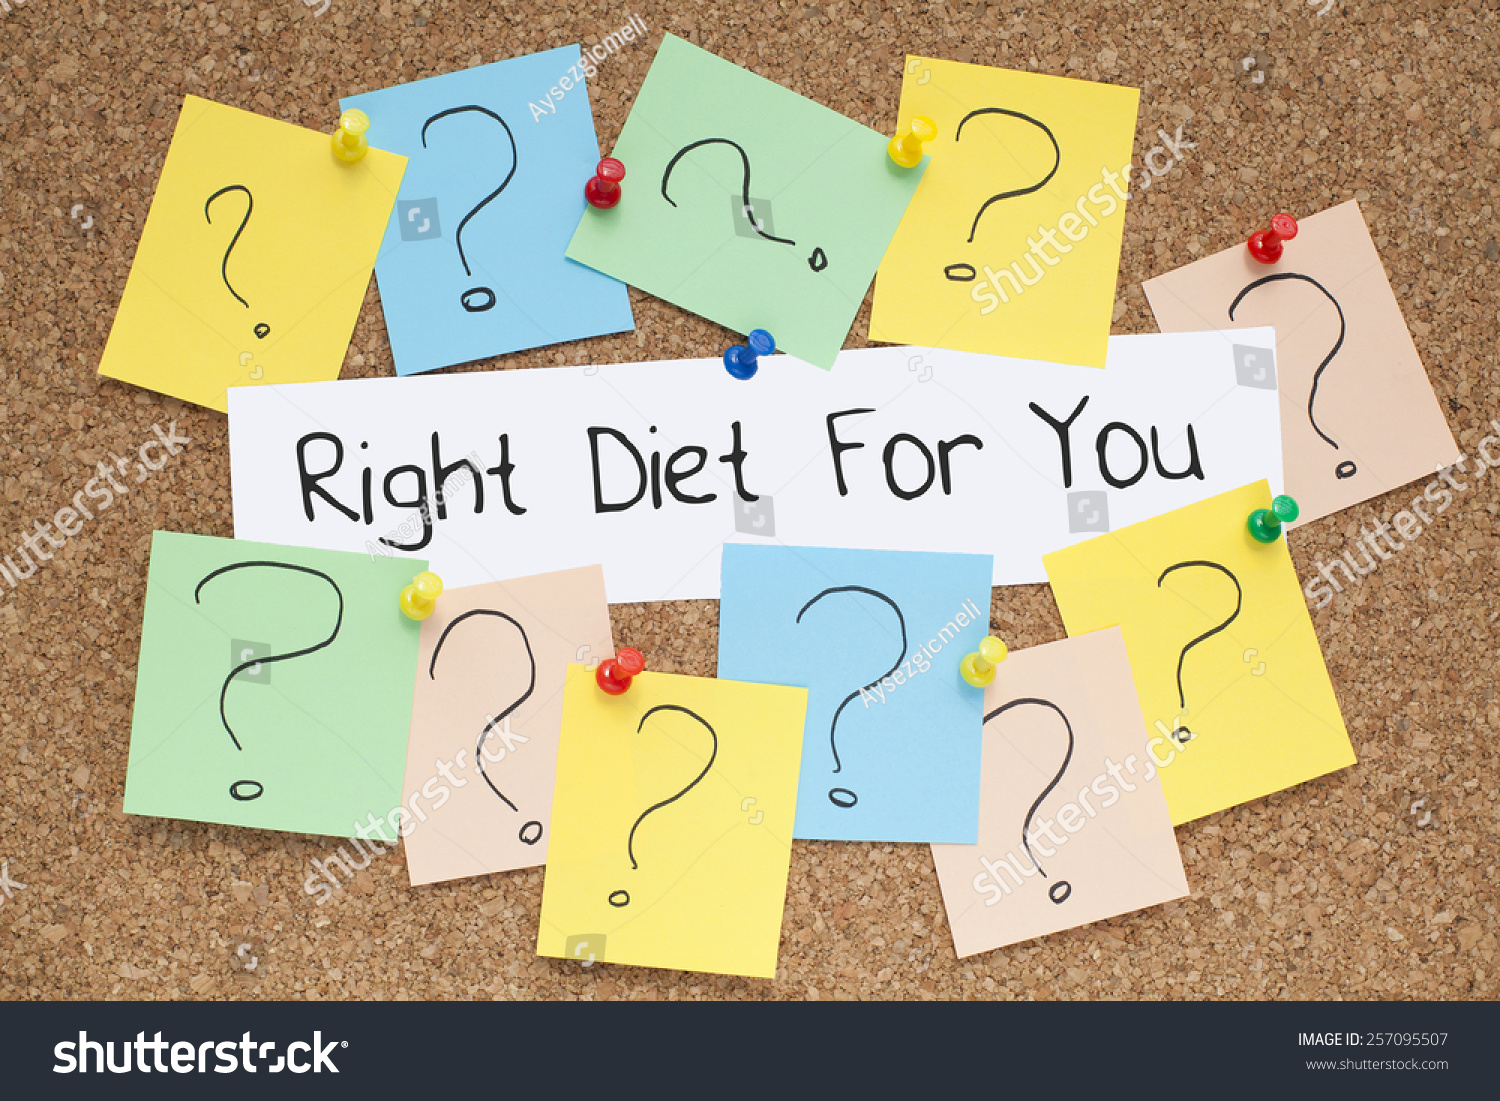 What is the right diet for you